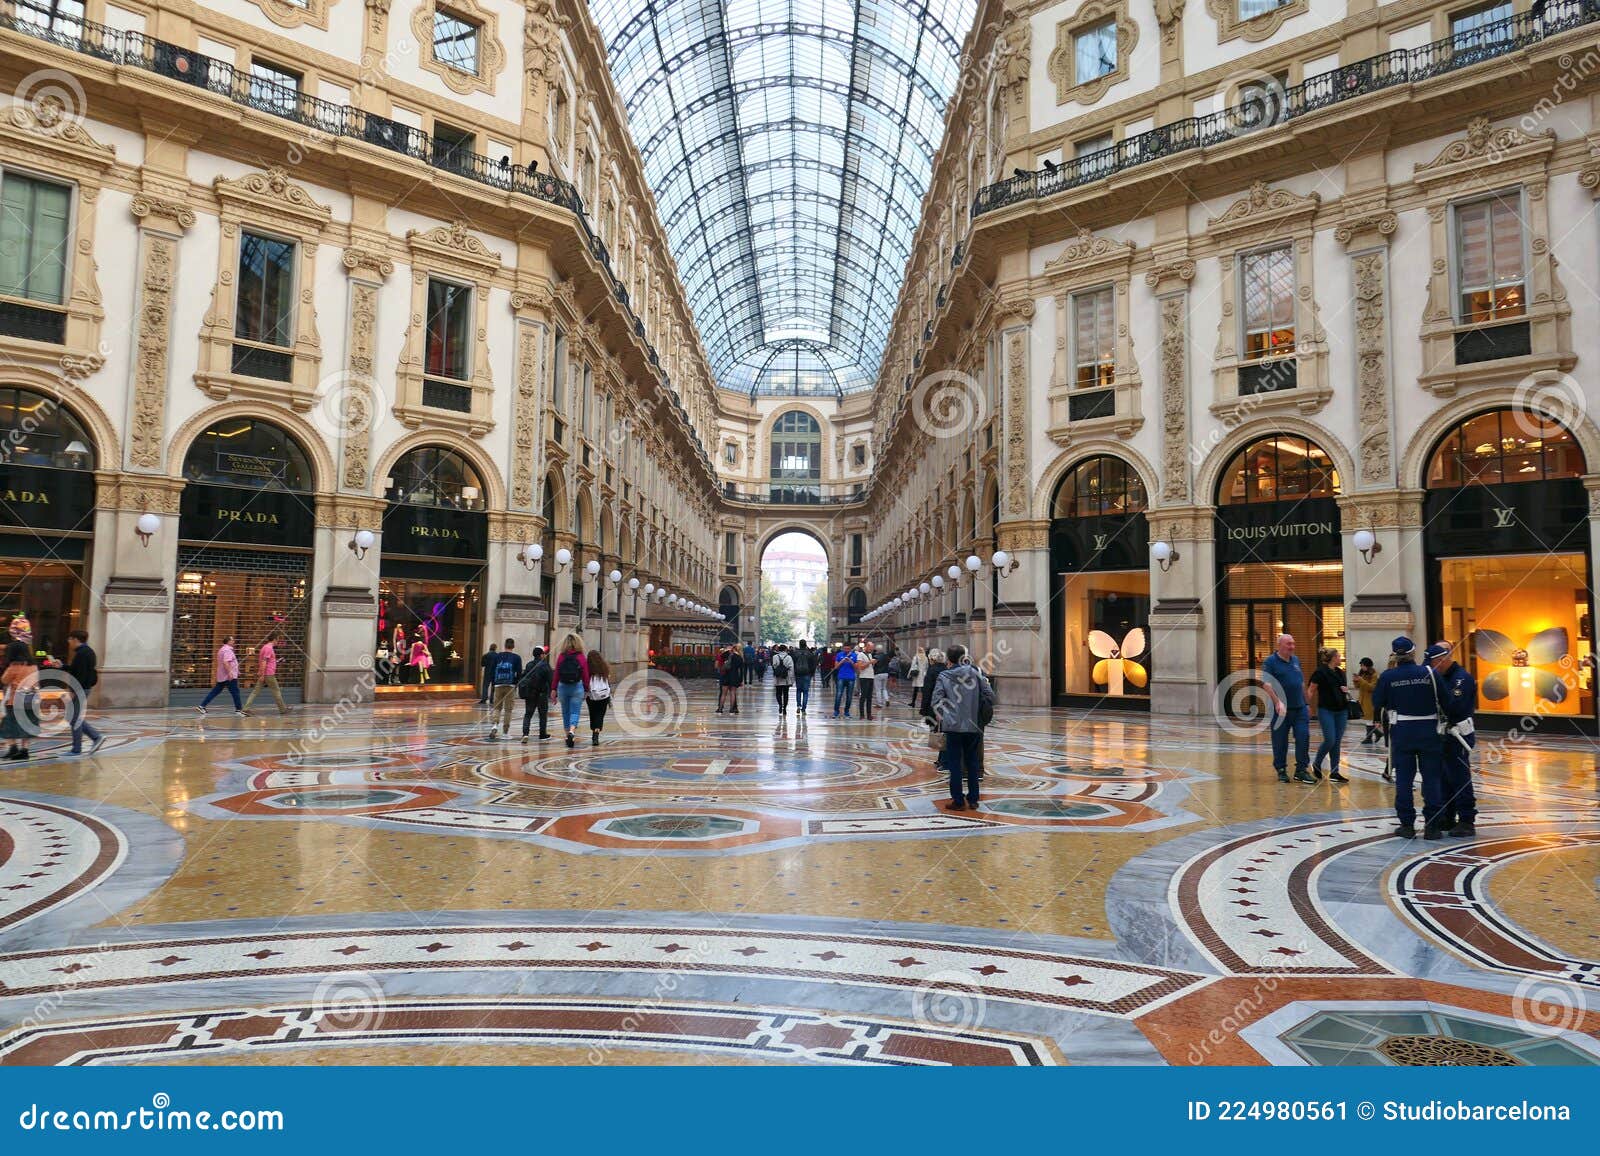 One of the world's oldest shopping malls Galleria Vittorio